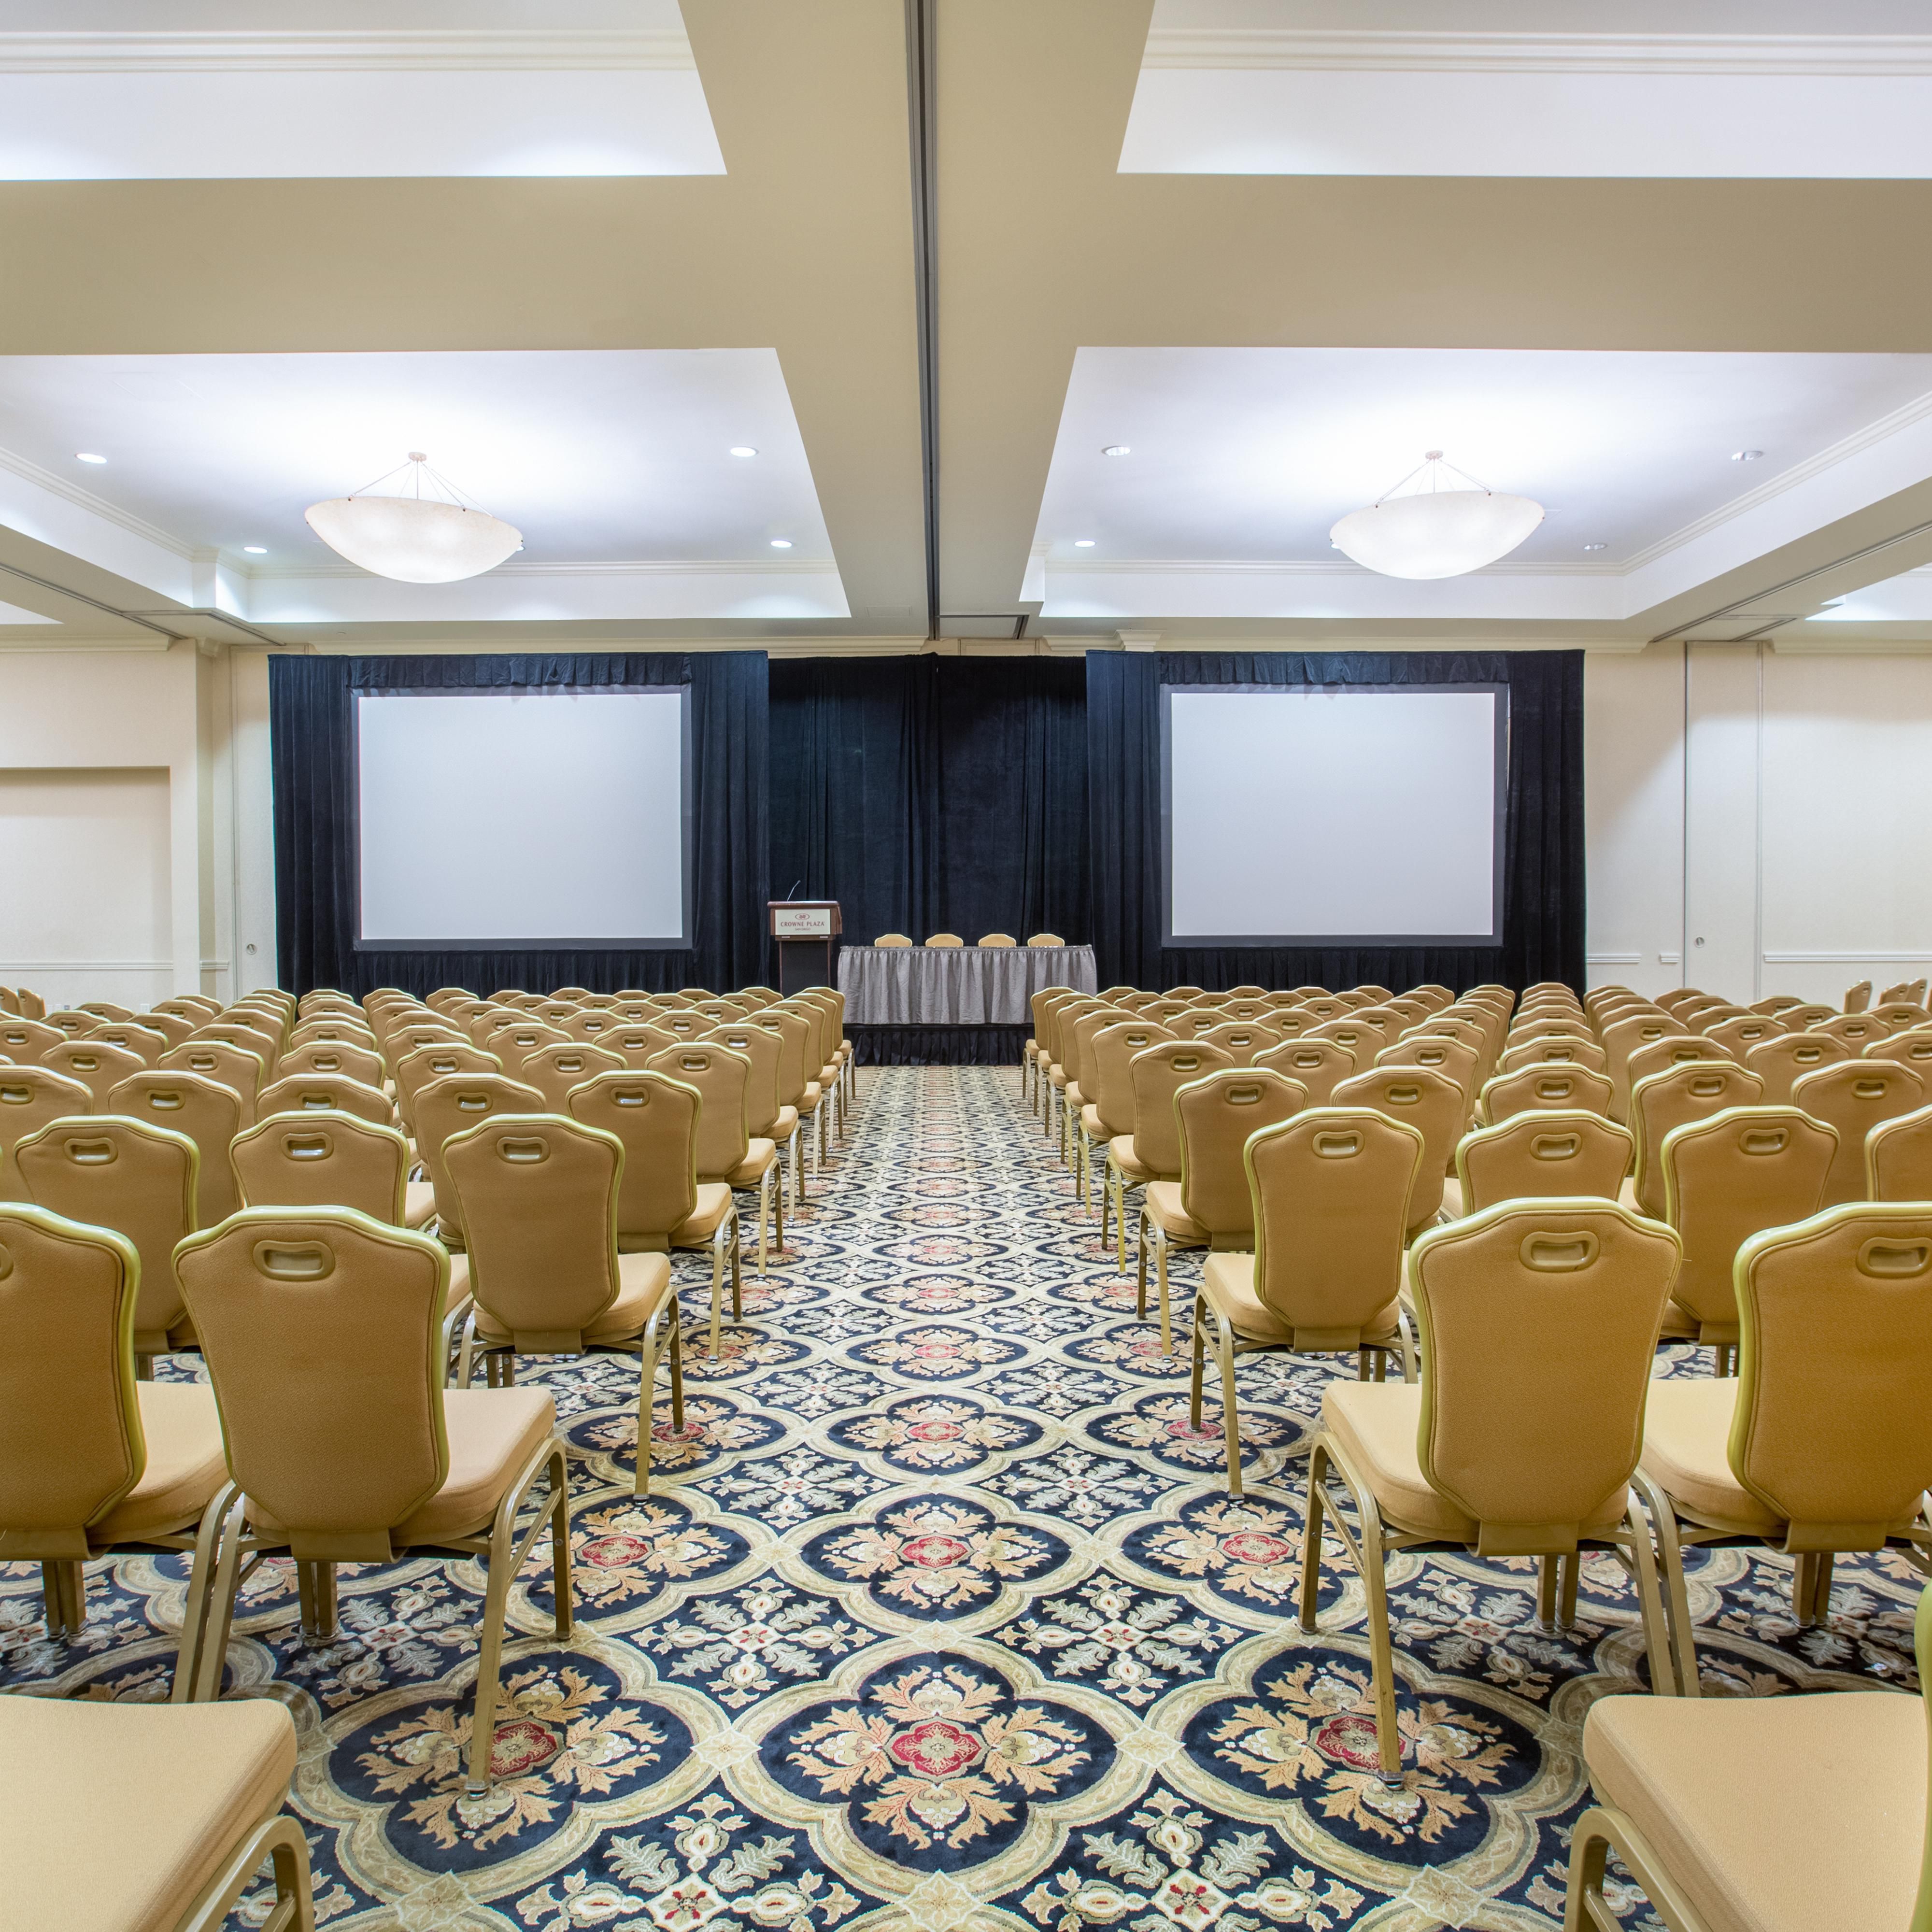 Theater style is perfect for your next big conference.